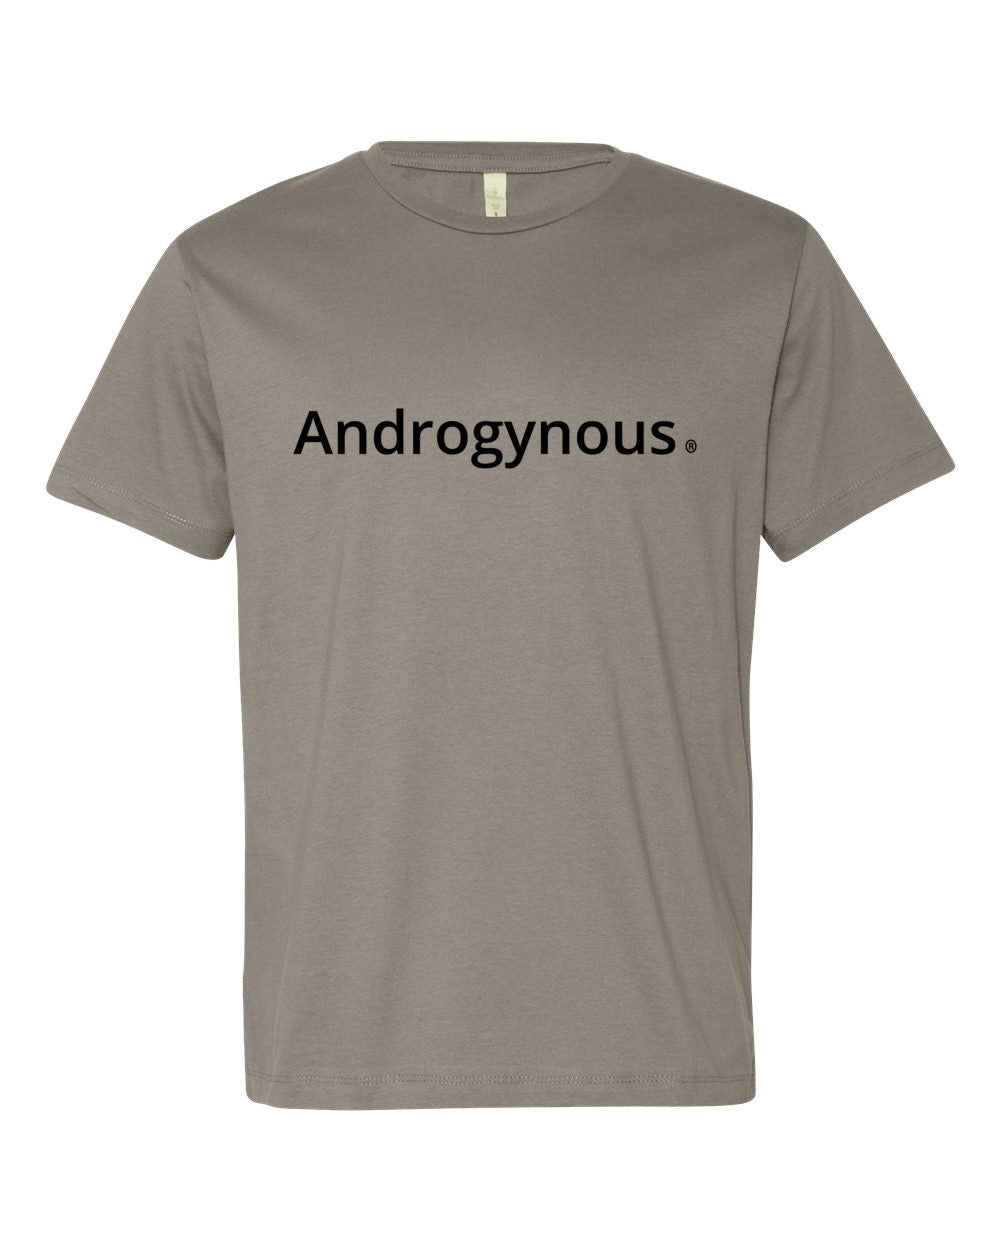 ANDROGYNOUS BLACK ON GREY PRINTED FINE JERSEY COTTON-T-SHIRT